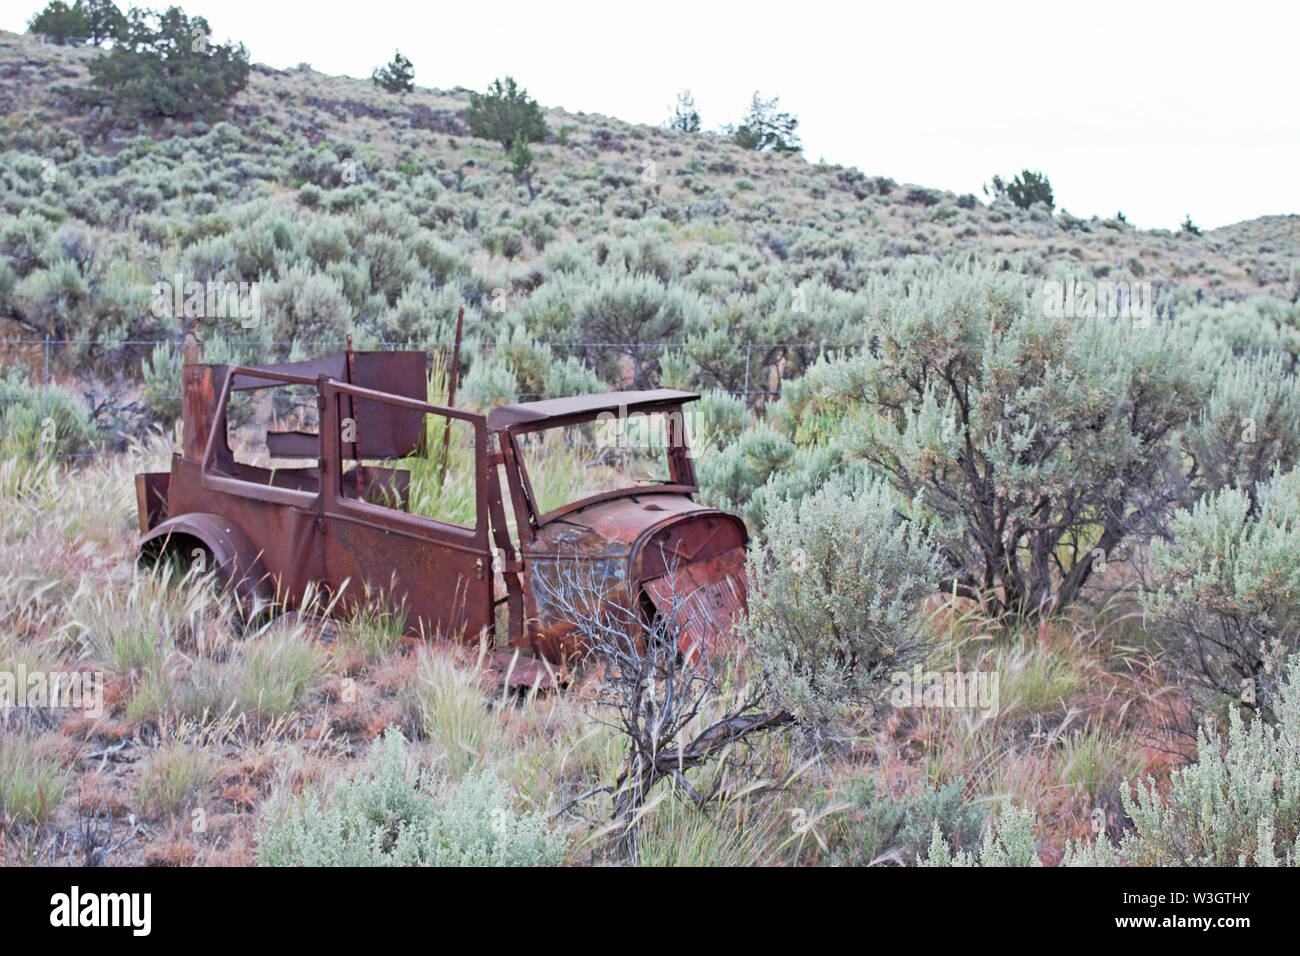 An antique car body decaying in the Oregon desert. Stock Photo